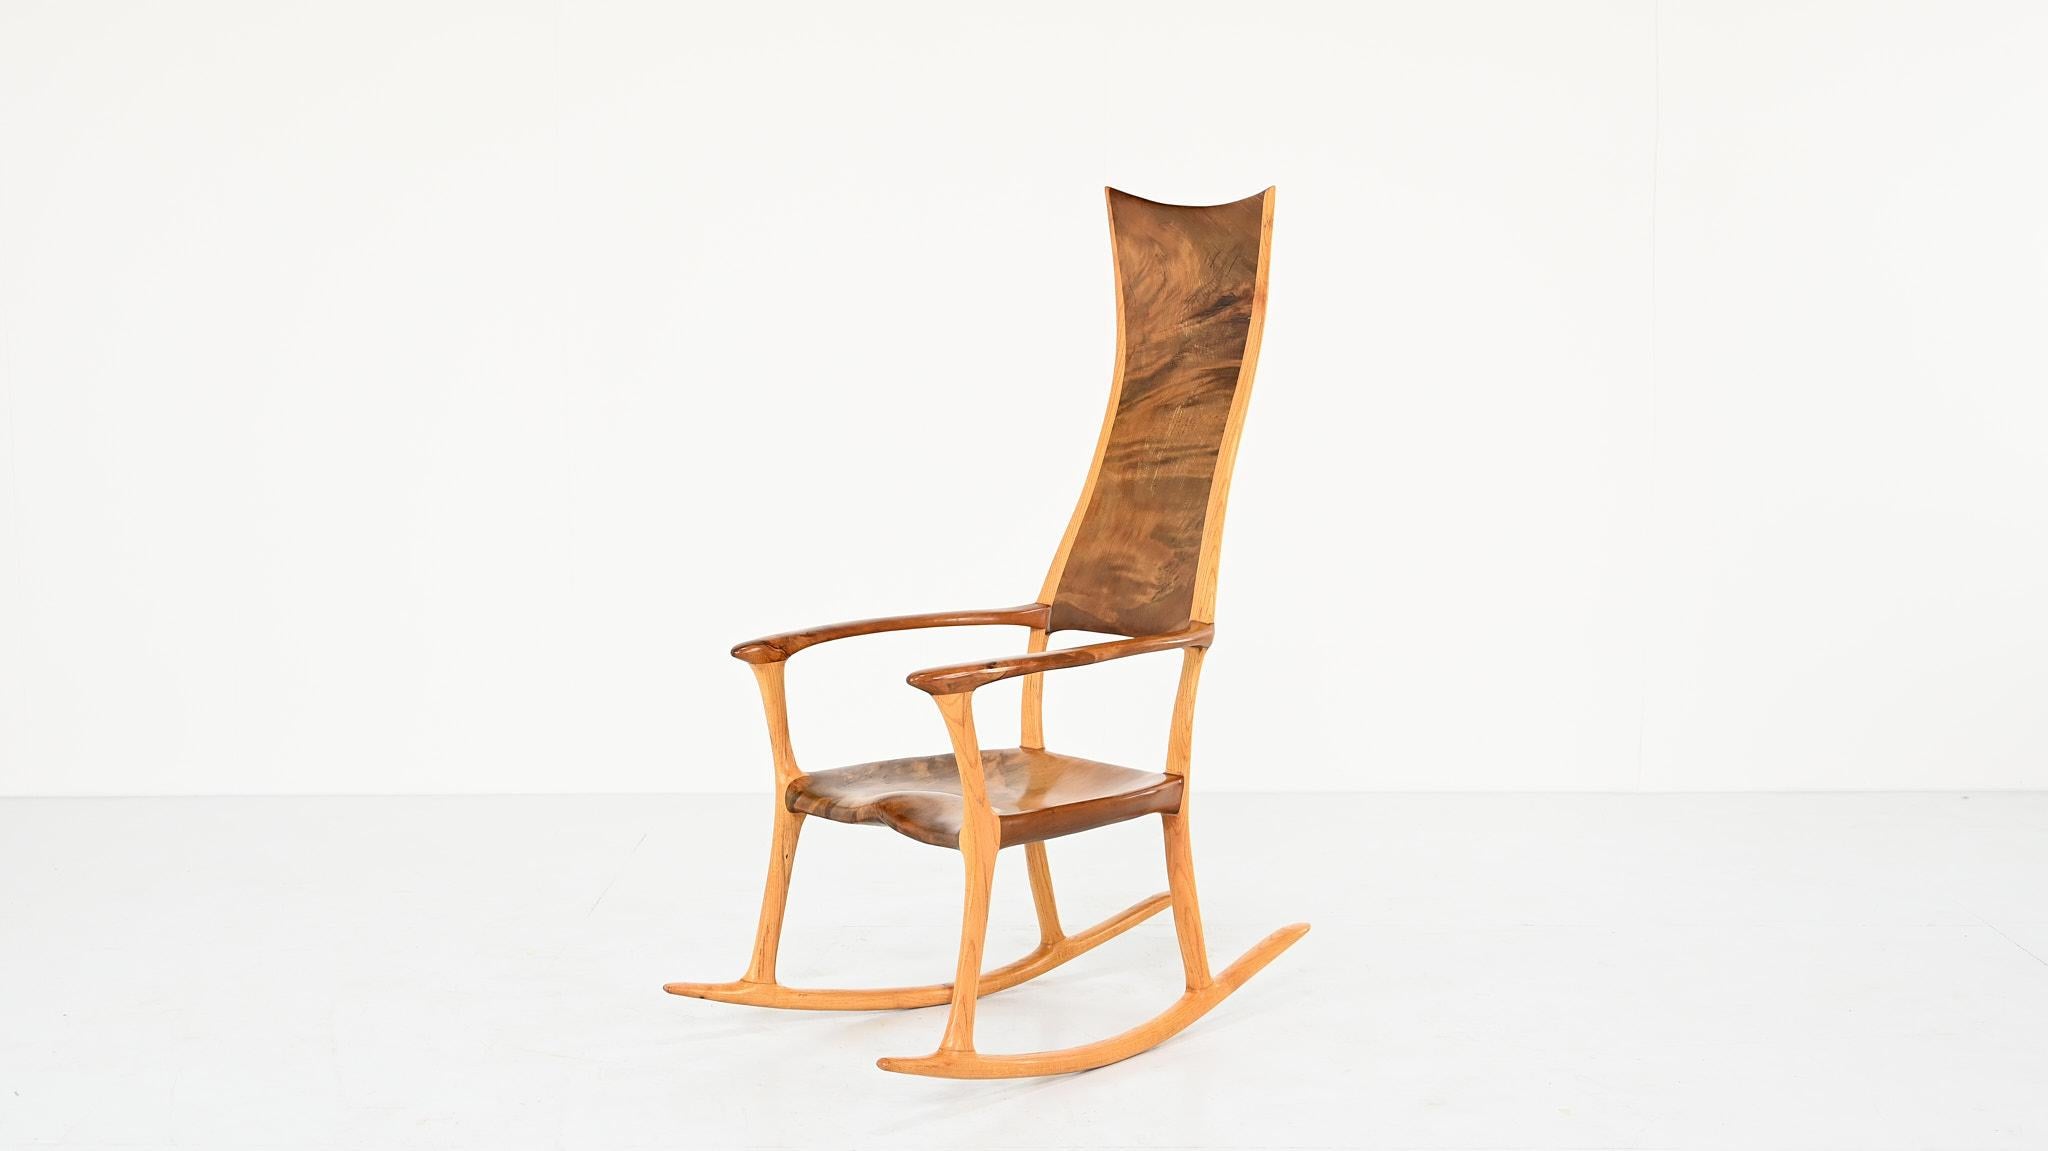 Donald Gordon, rocking chair in Kauri wood

This rocking chair, made by Donald Gordon in the early 2000s, is a special object, a unique piece of furniture, the fantastic combination of creativity and craftsmanship, the epitome of why we love the